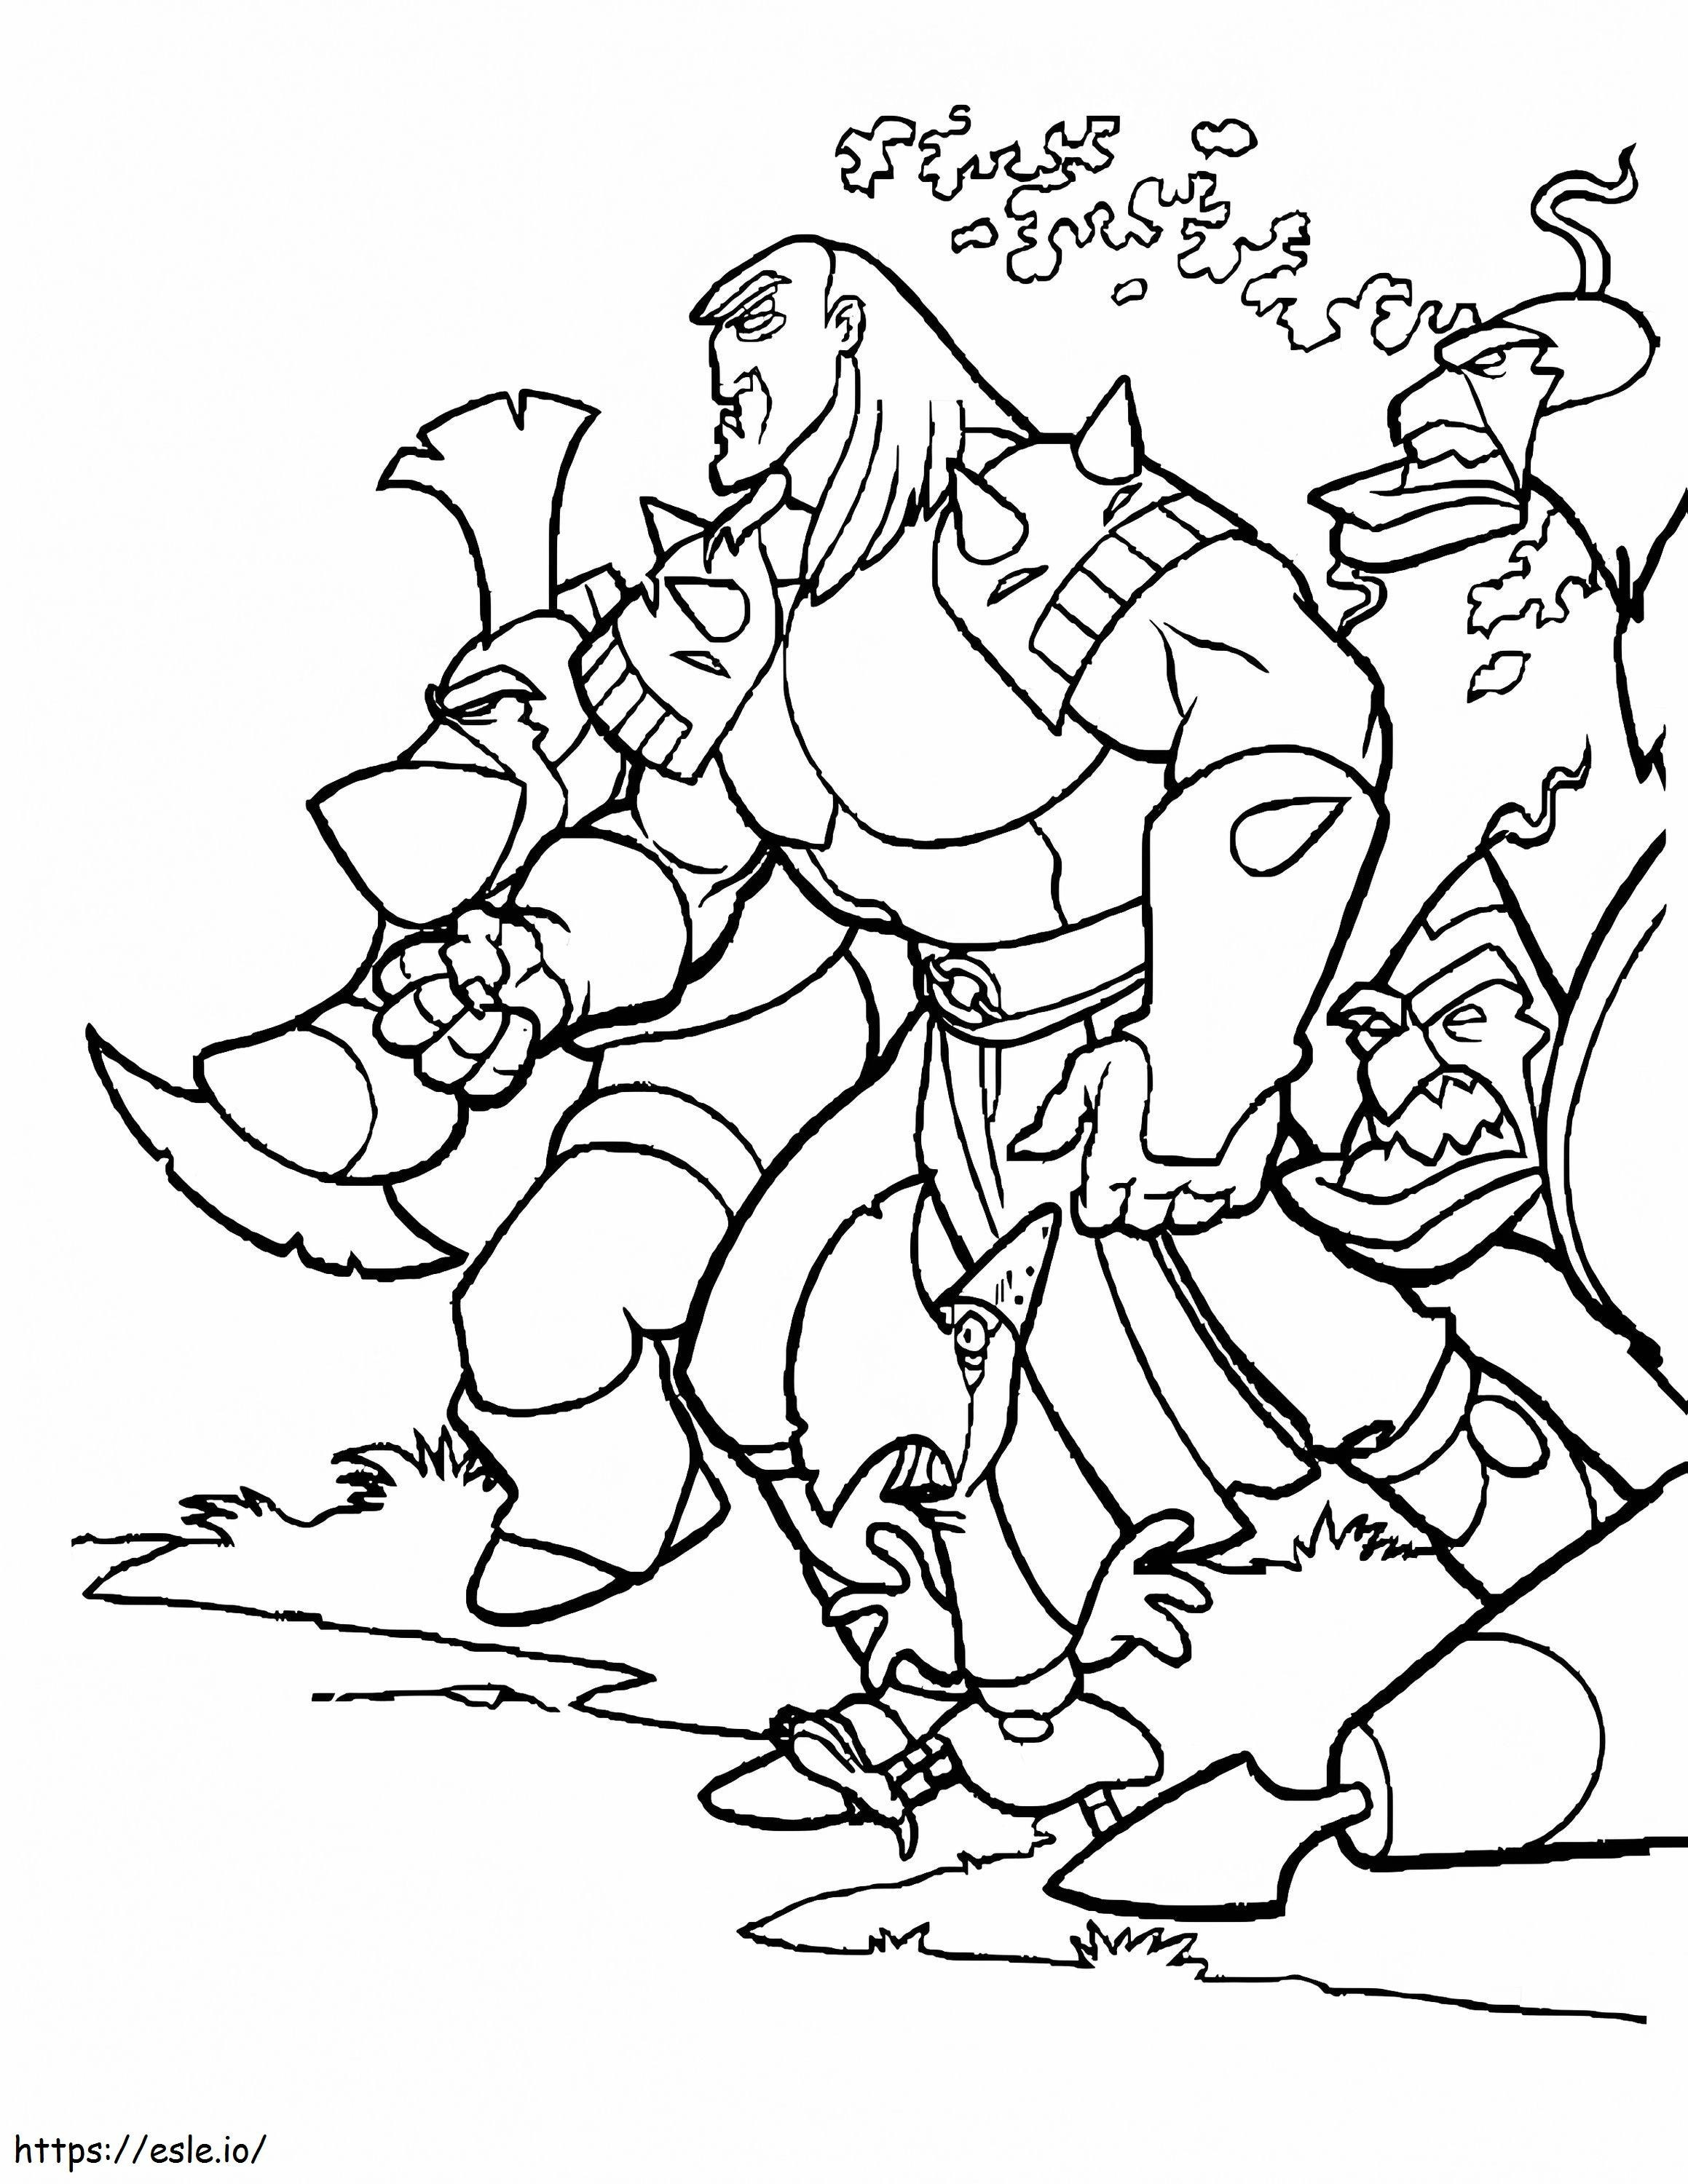 Quest For Camelot 15 coloring page